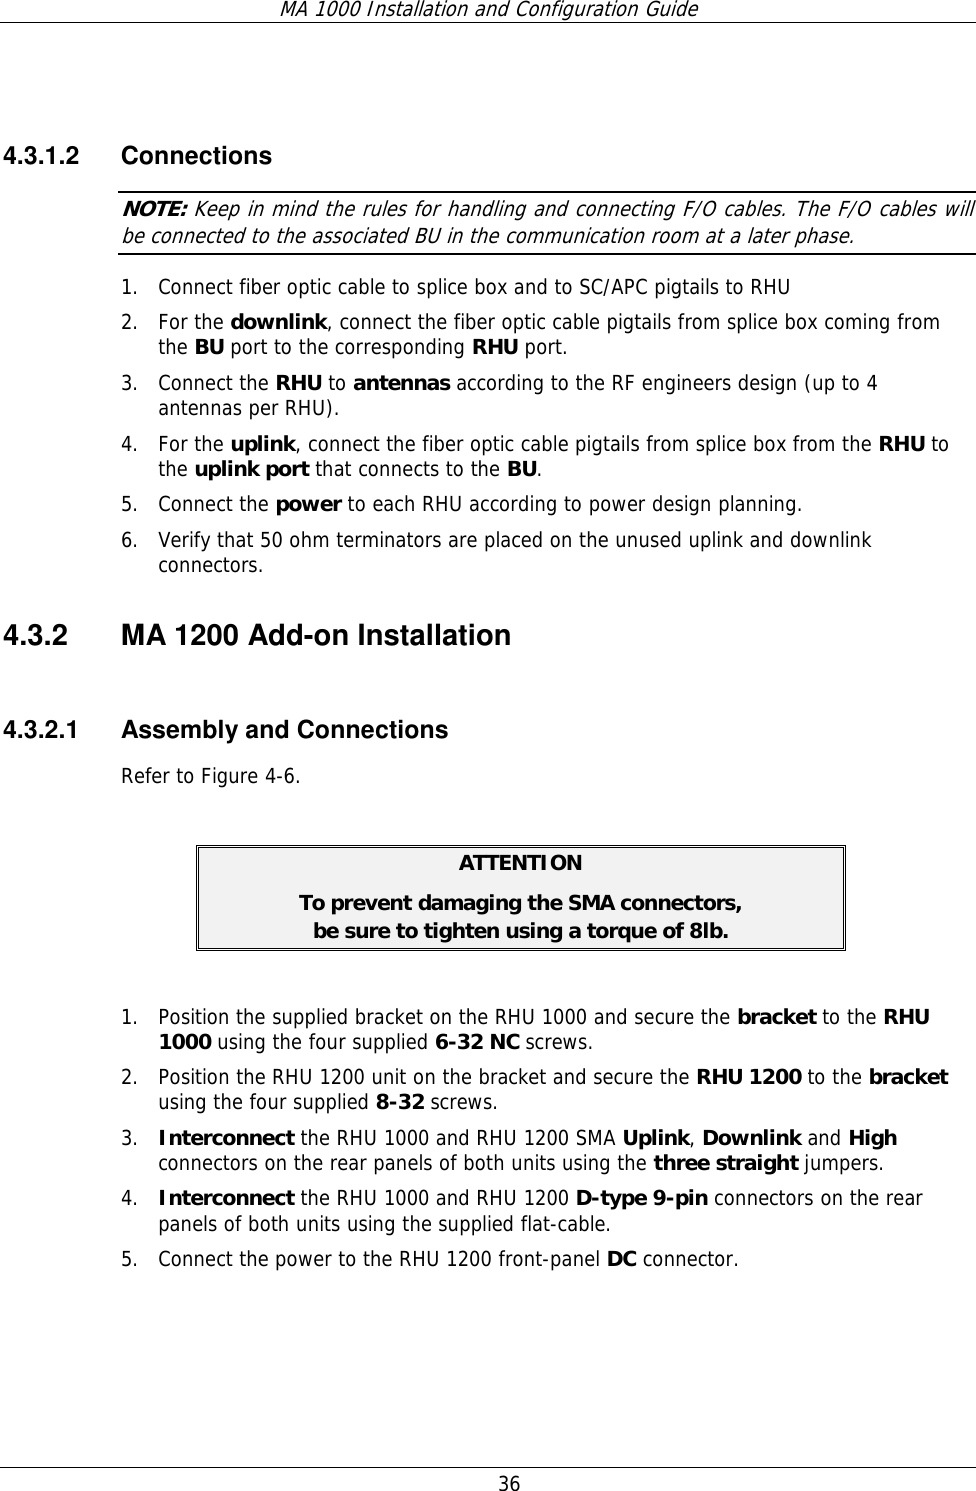 MA 1000 Installation and Configuration Guide  36    4.3.1.2 Connections NOTE: Keep in mind the rules for handling and connecting F/O cables. The F/O cables will be connected to the associated BU in the communication room at a later phase.  1. Connect fiber optic cable to splice box and to SC/APC pigtails to RHU  2. For the downlink, connect the fiber optic cable pigtails from splice box coming from the BU port to the corresponding RHU port.  3. Connect the RHU to antennas according to the RF engineers design (up to 4 antennas per RHU).  4. For the uplink, connect the fiber optic cable pigtails from splice box from the RHU to the uplink port that connects to the BU.  5. Connect the power to each RHU according to power design planning.   6. Verify that 50 ohm terminators are placed on the unused uplink and downlink connectors. 4.3.2  MA 1200 Add-on Installation  4.3.2.1  Assembly and Connections Refer to Figure  4-6.  ATTENTION To prevent damaging the SMA connectors,  be sure to tighten using a torque of 8lb.  1. Position the supplied bracket on the RHU 1000 and secure the bracket to the RHU 1000 using the four supplied 6-32 NC screws. 2. Position the RHU 1200 unit on the bracket and secure the RHU 1200 to the bracket using the four supplied 8-32 screws. 3. Interconnect the RHU 1000 and RHU 1200 SMA Uplink, Downlink and High connectors on the rear panels of both units using the three straight jumpers. 4. Interconnect the RHU 1000 and RHU 1200 D-type 9-pin connectors on the rear panels of both units using the supplied flat-cable. 5. Connect the power to the RHU 1200 front-panel DC connector.  